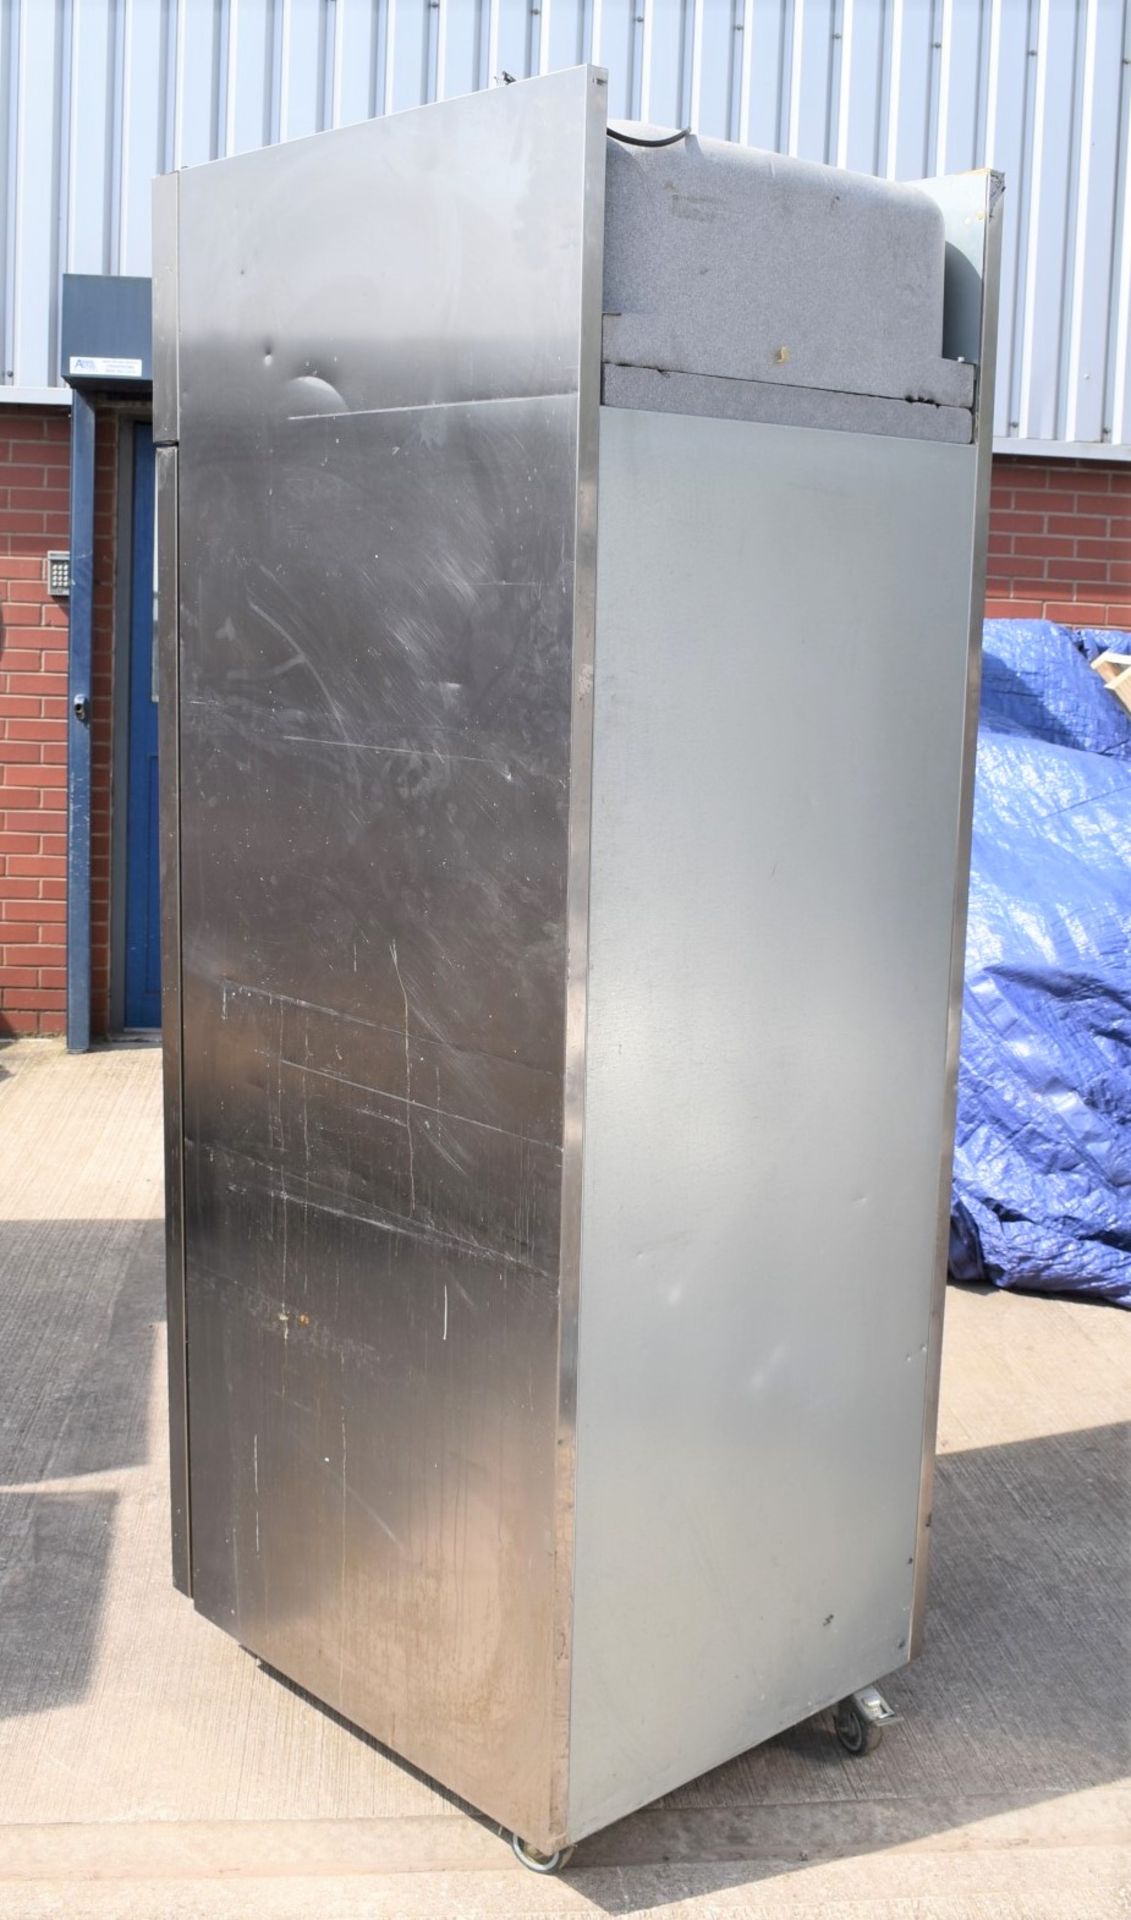 1 x Foster EcoPro G2 EP700M Upright Refrigerated Meat Cabinet - Stainless Steel Exterior RRP £3,059 - Image 7 of 11